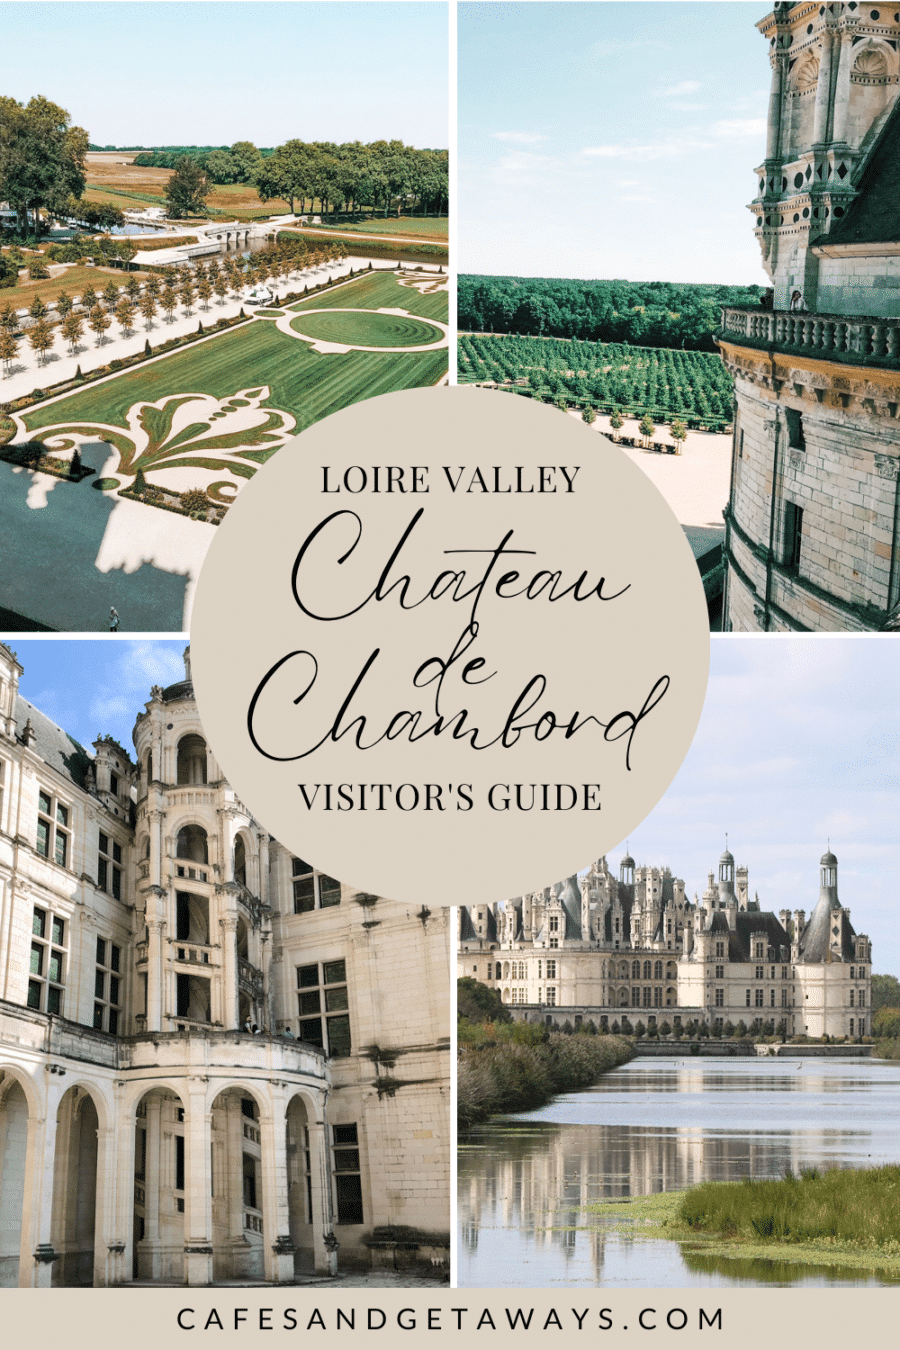 Château de Chambord: Travel guide and history - Snippets of Paris